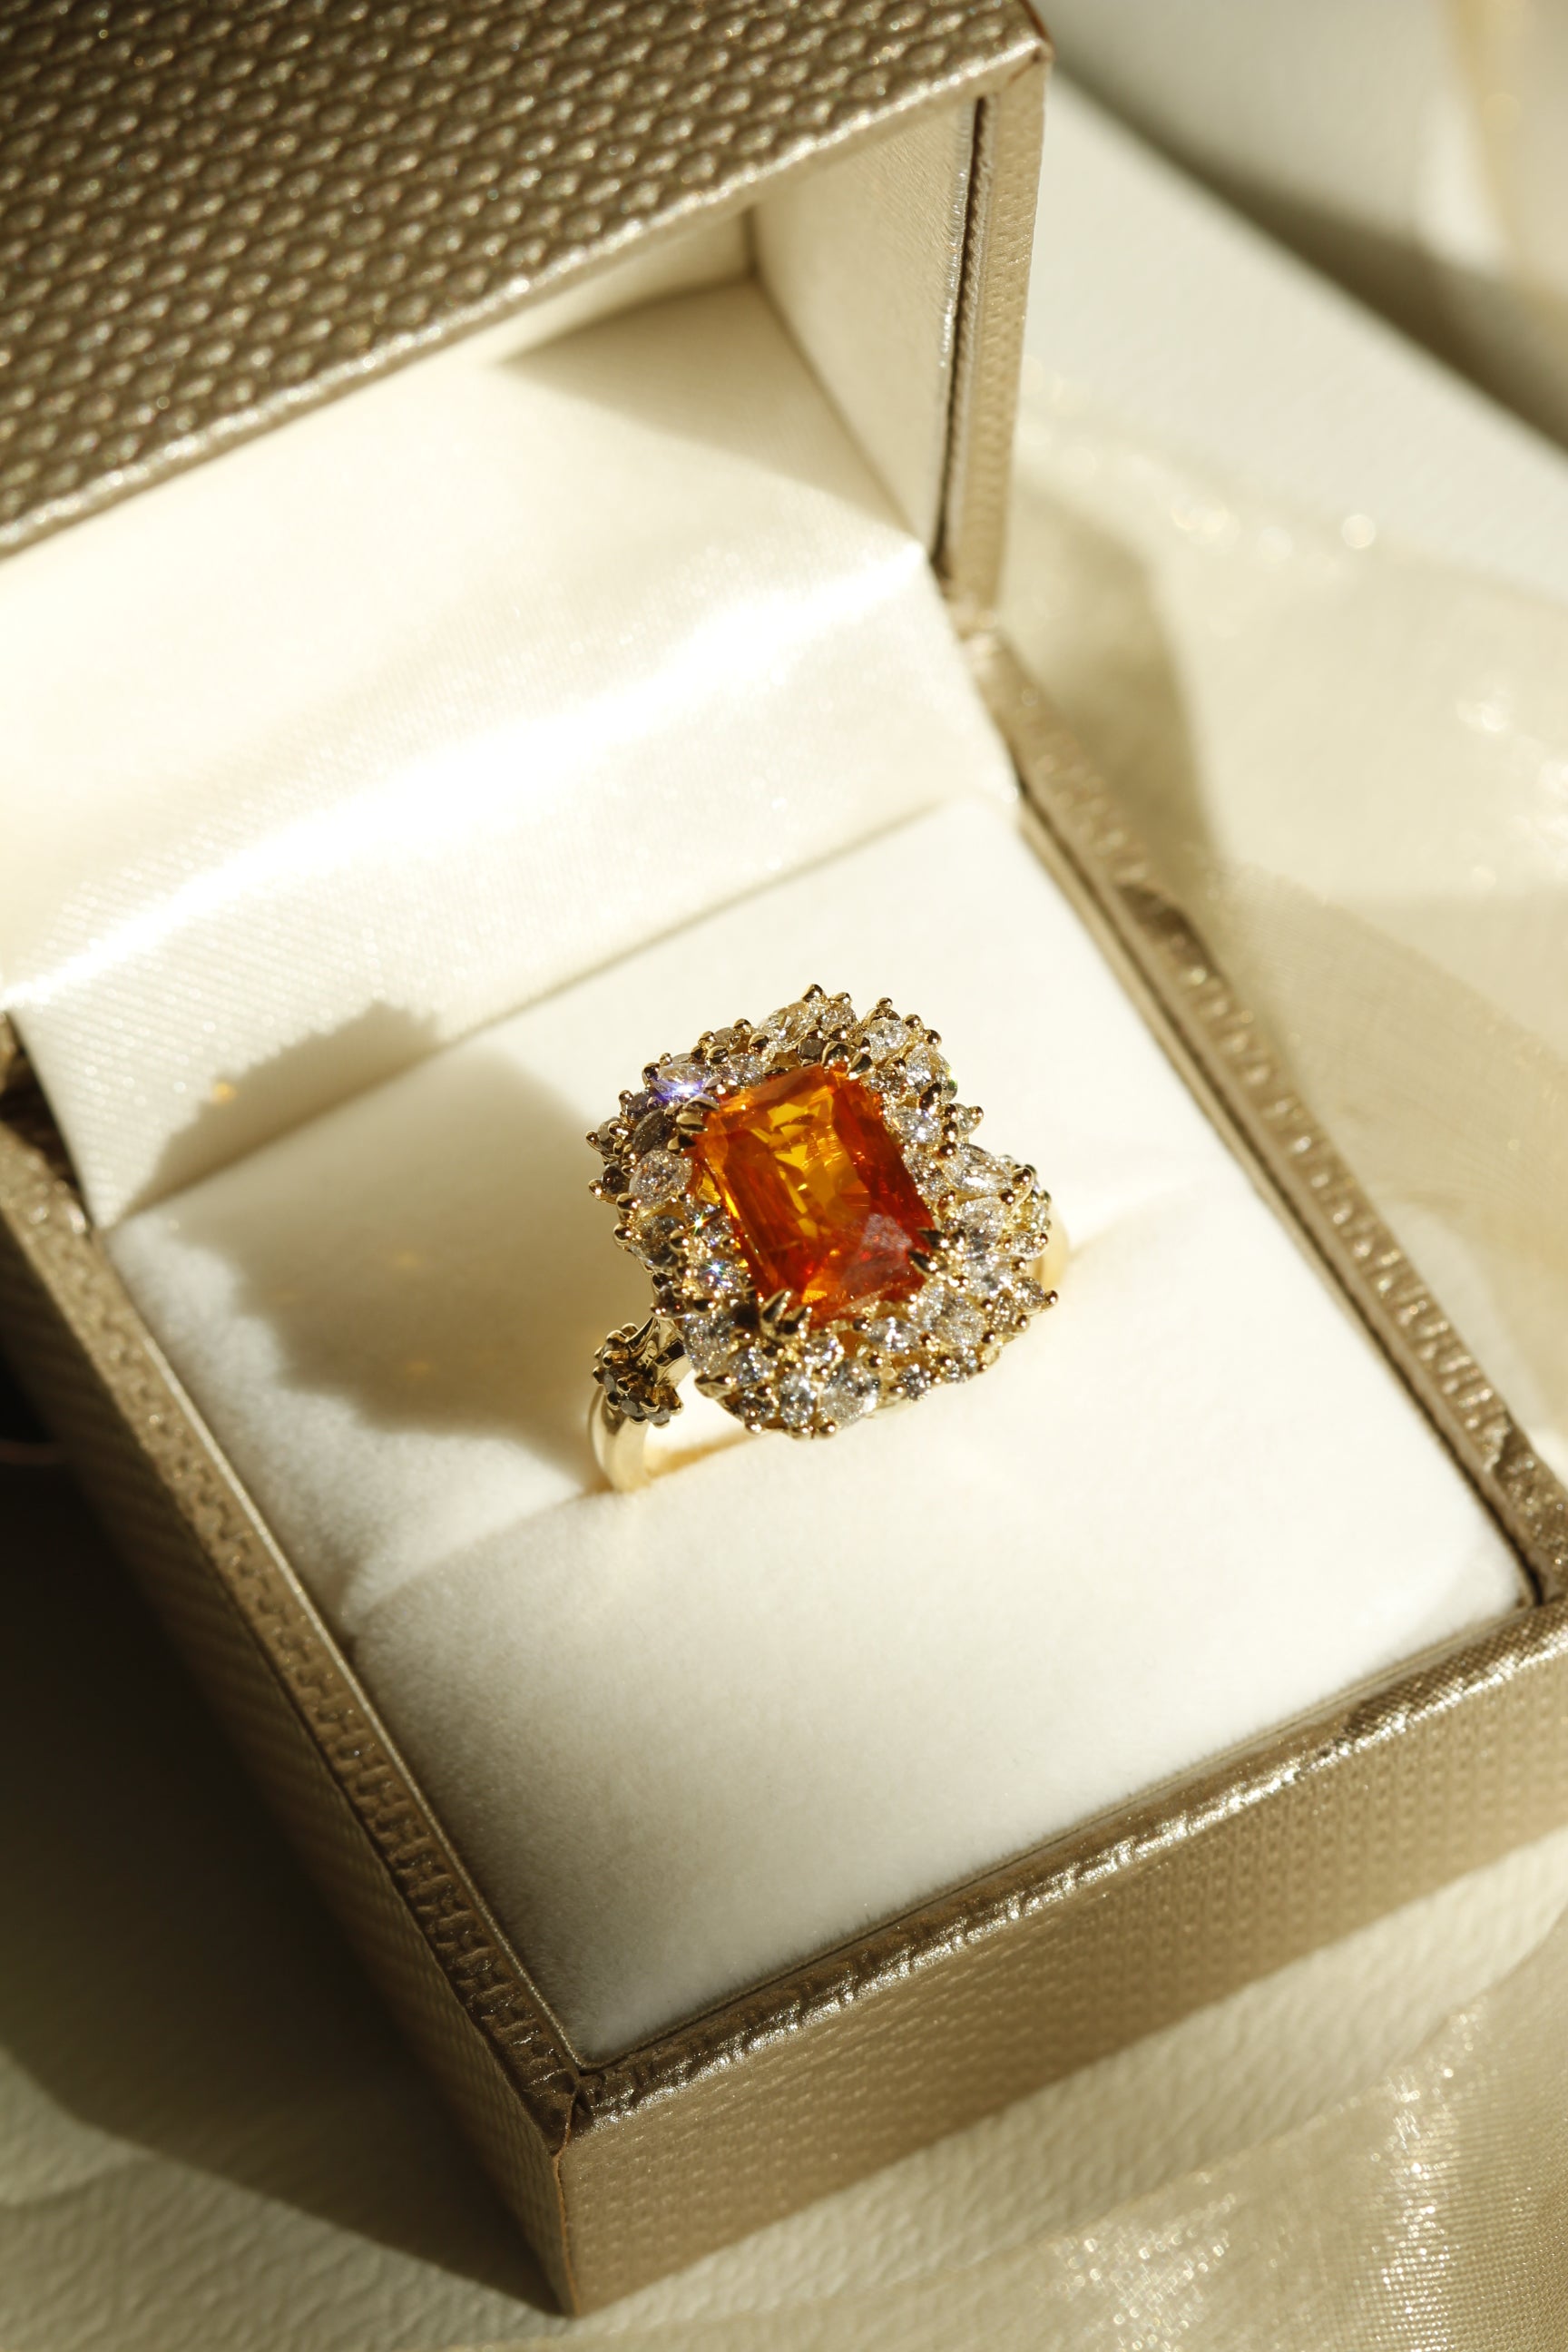 Marquise cut diamond, pear cut diamond, and round brilliant cut diamond surrounding an orange sapphire in a yellow gold ring for mobile